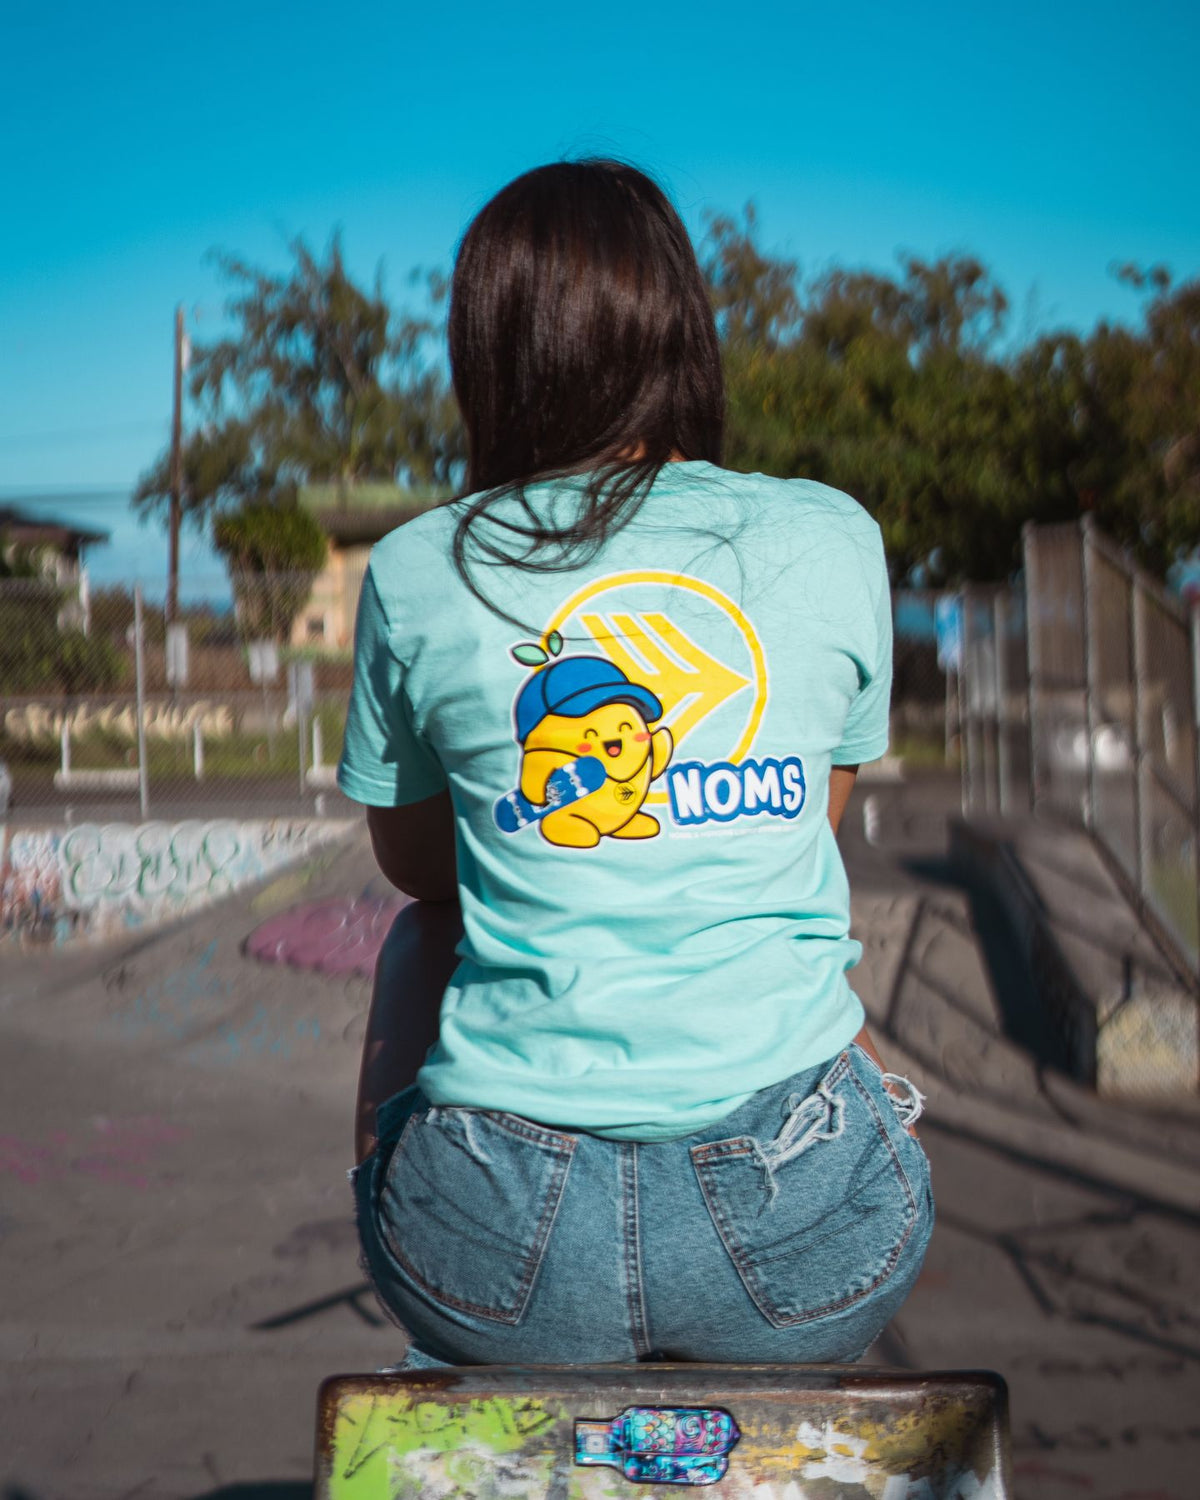 Honors x Noms Go Skate Tee - Teal